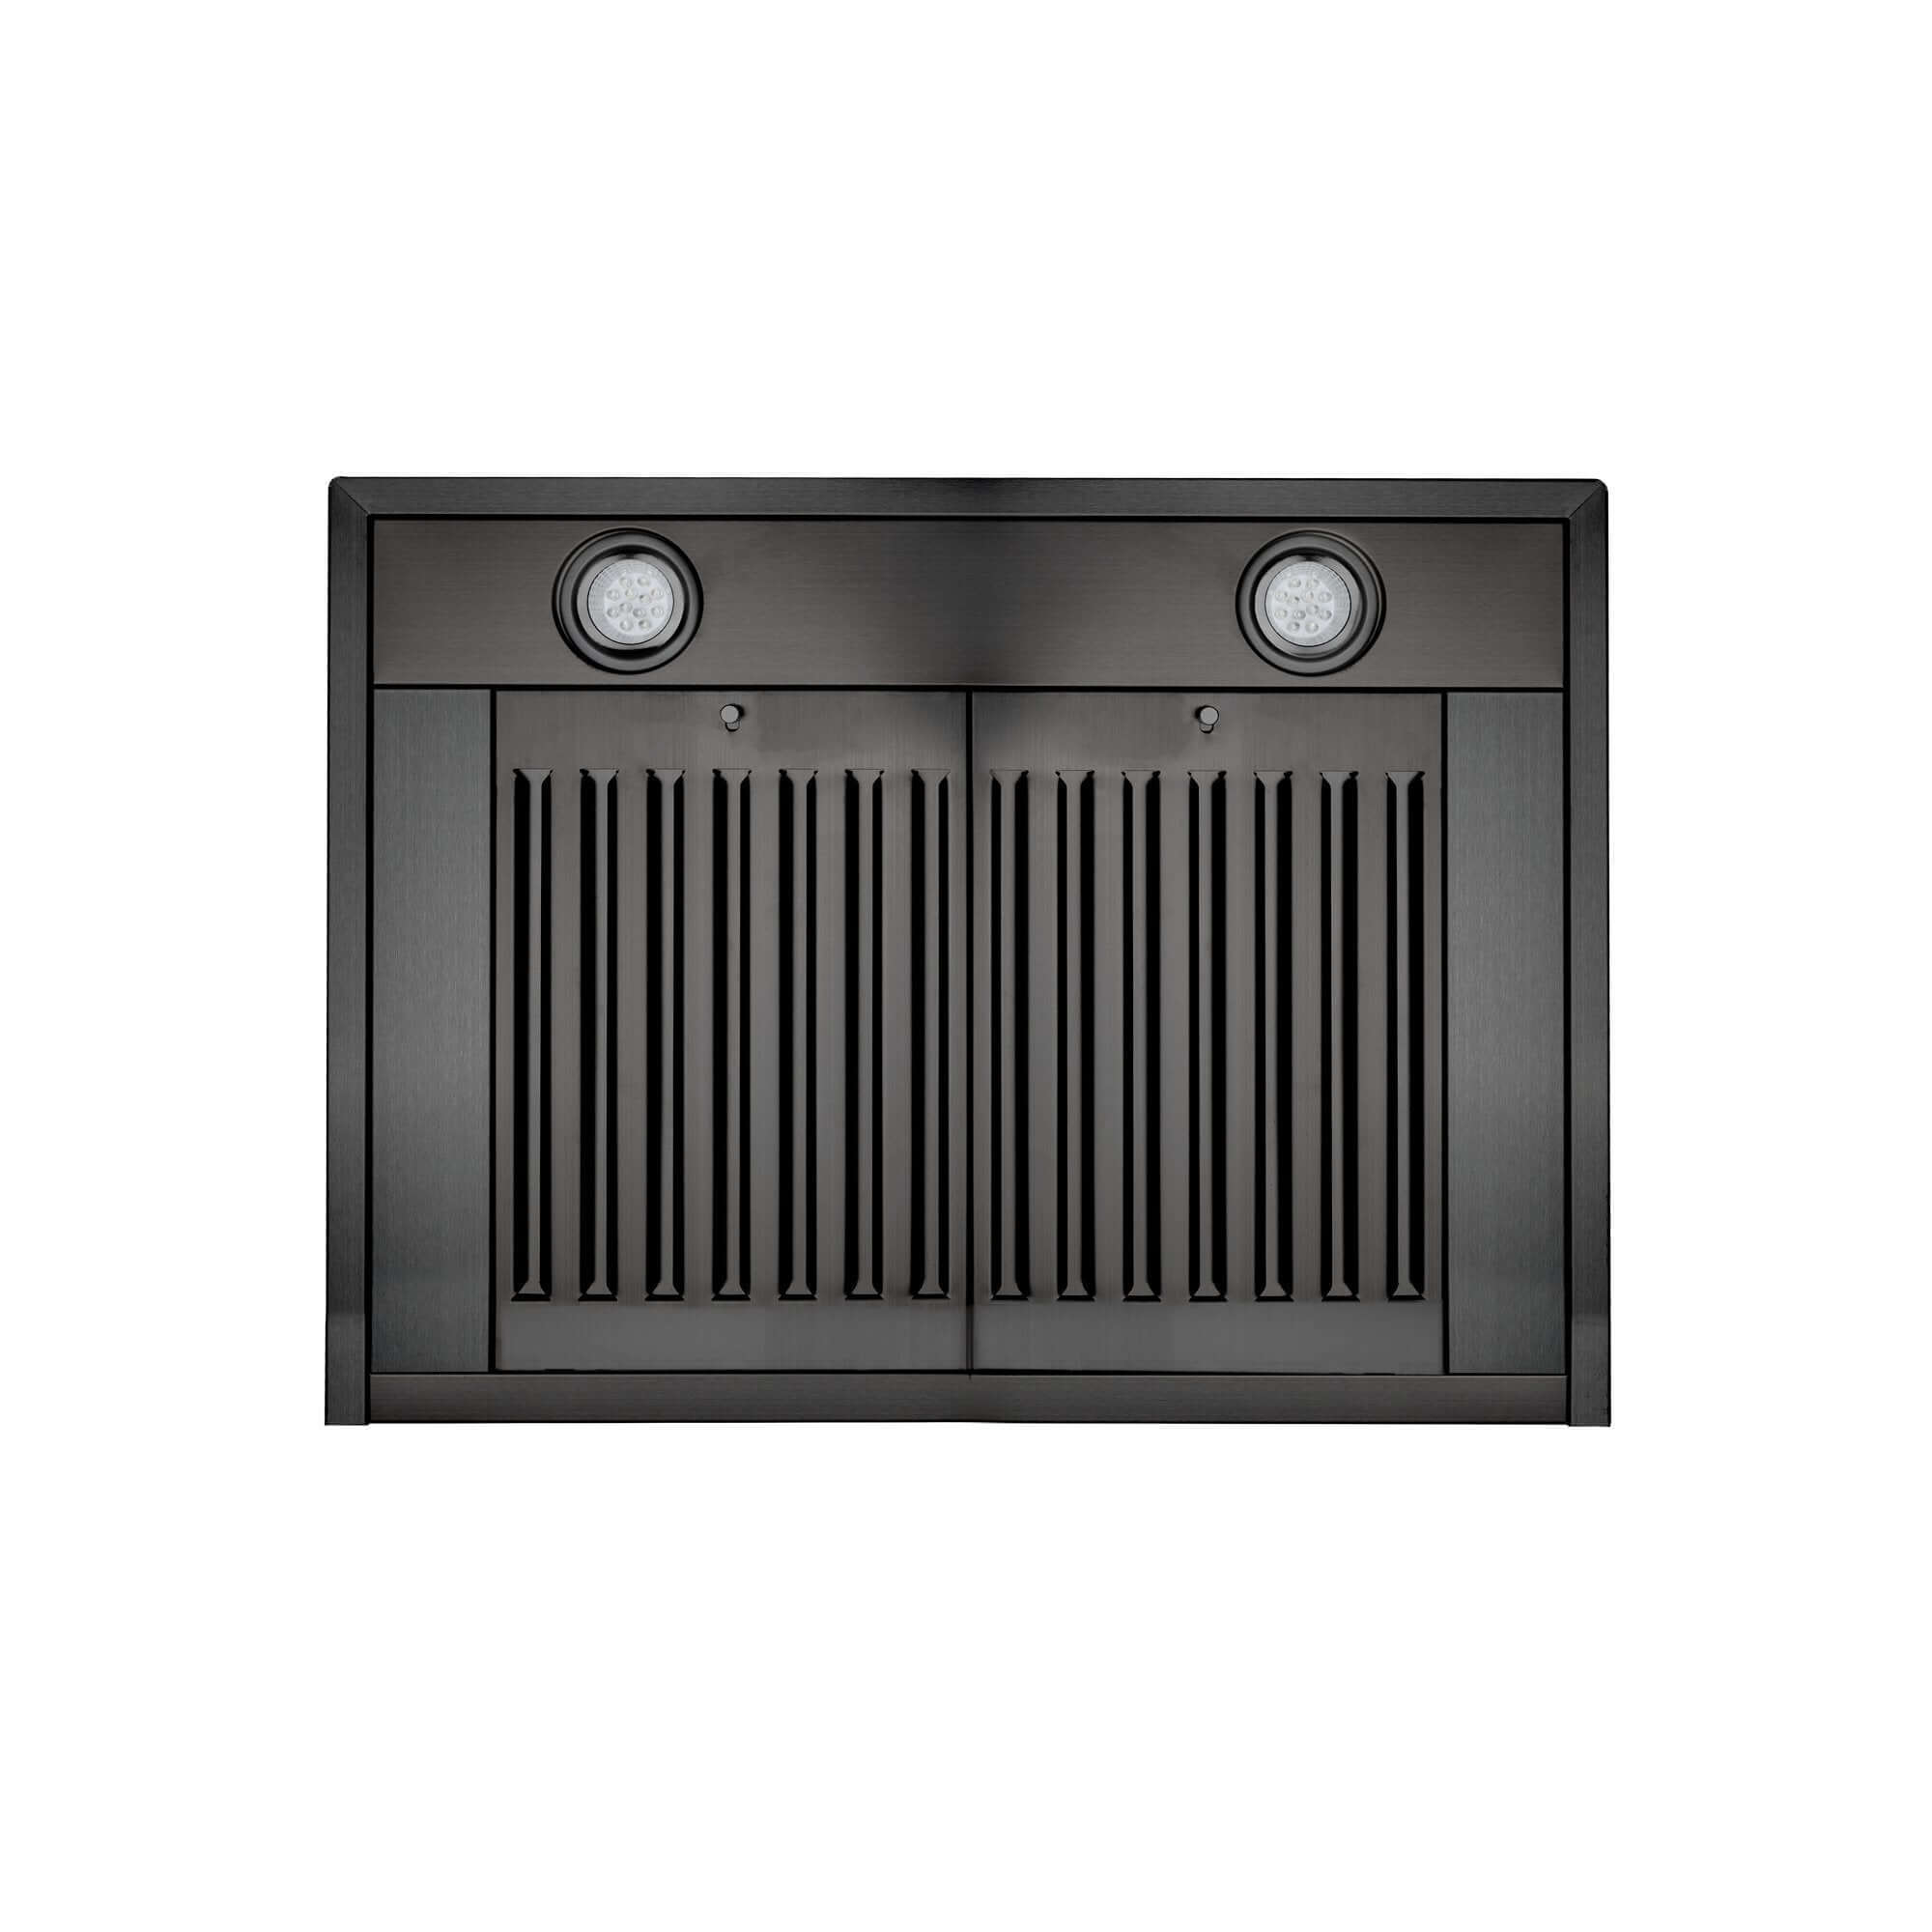 ZLINE BSKBN black stainless steel wall mount range hood under view of baffle filters and LED lighting.